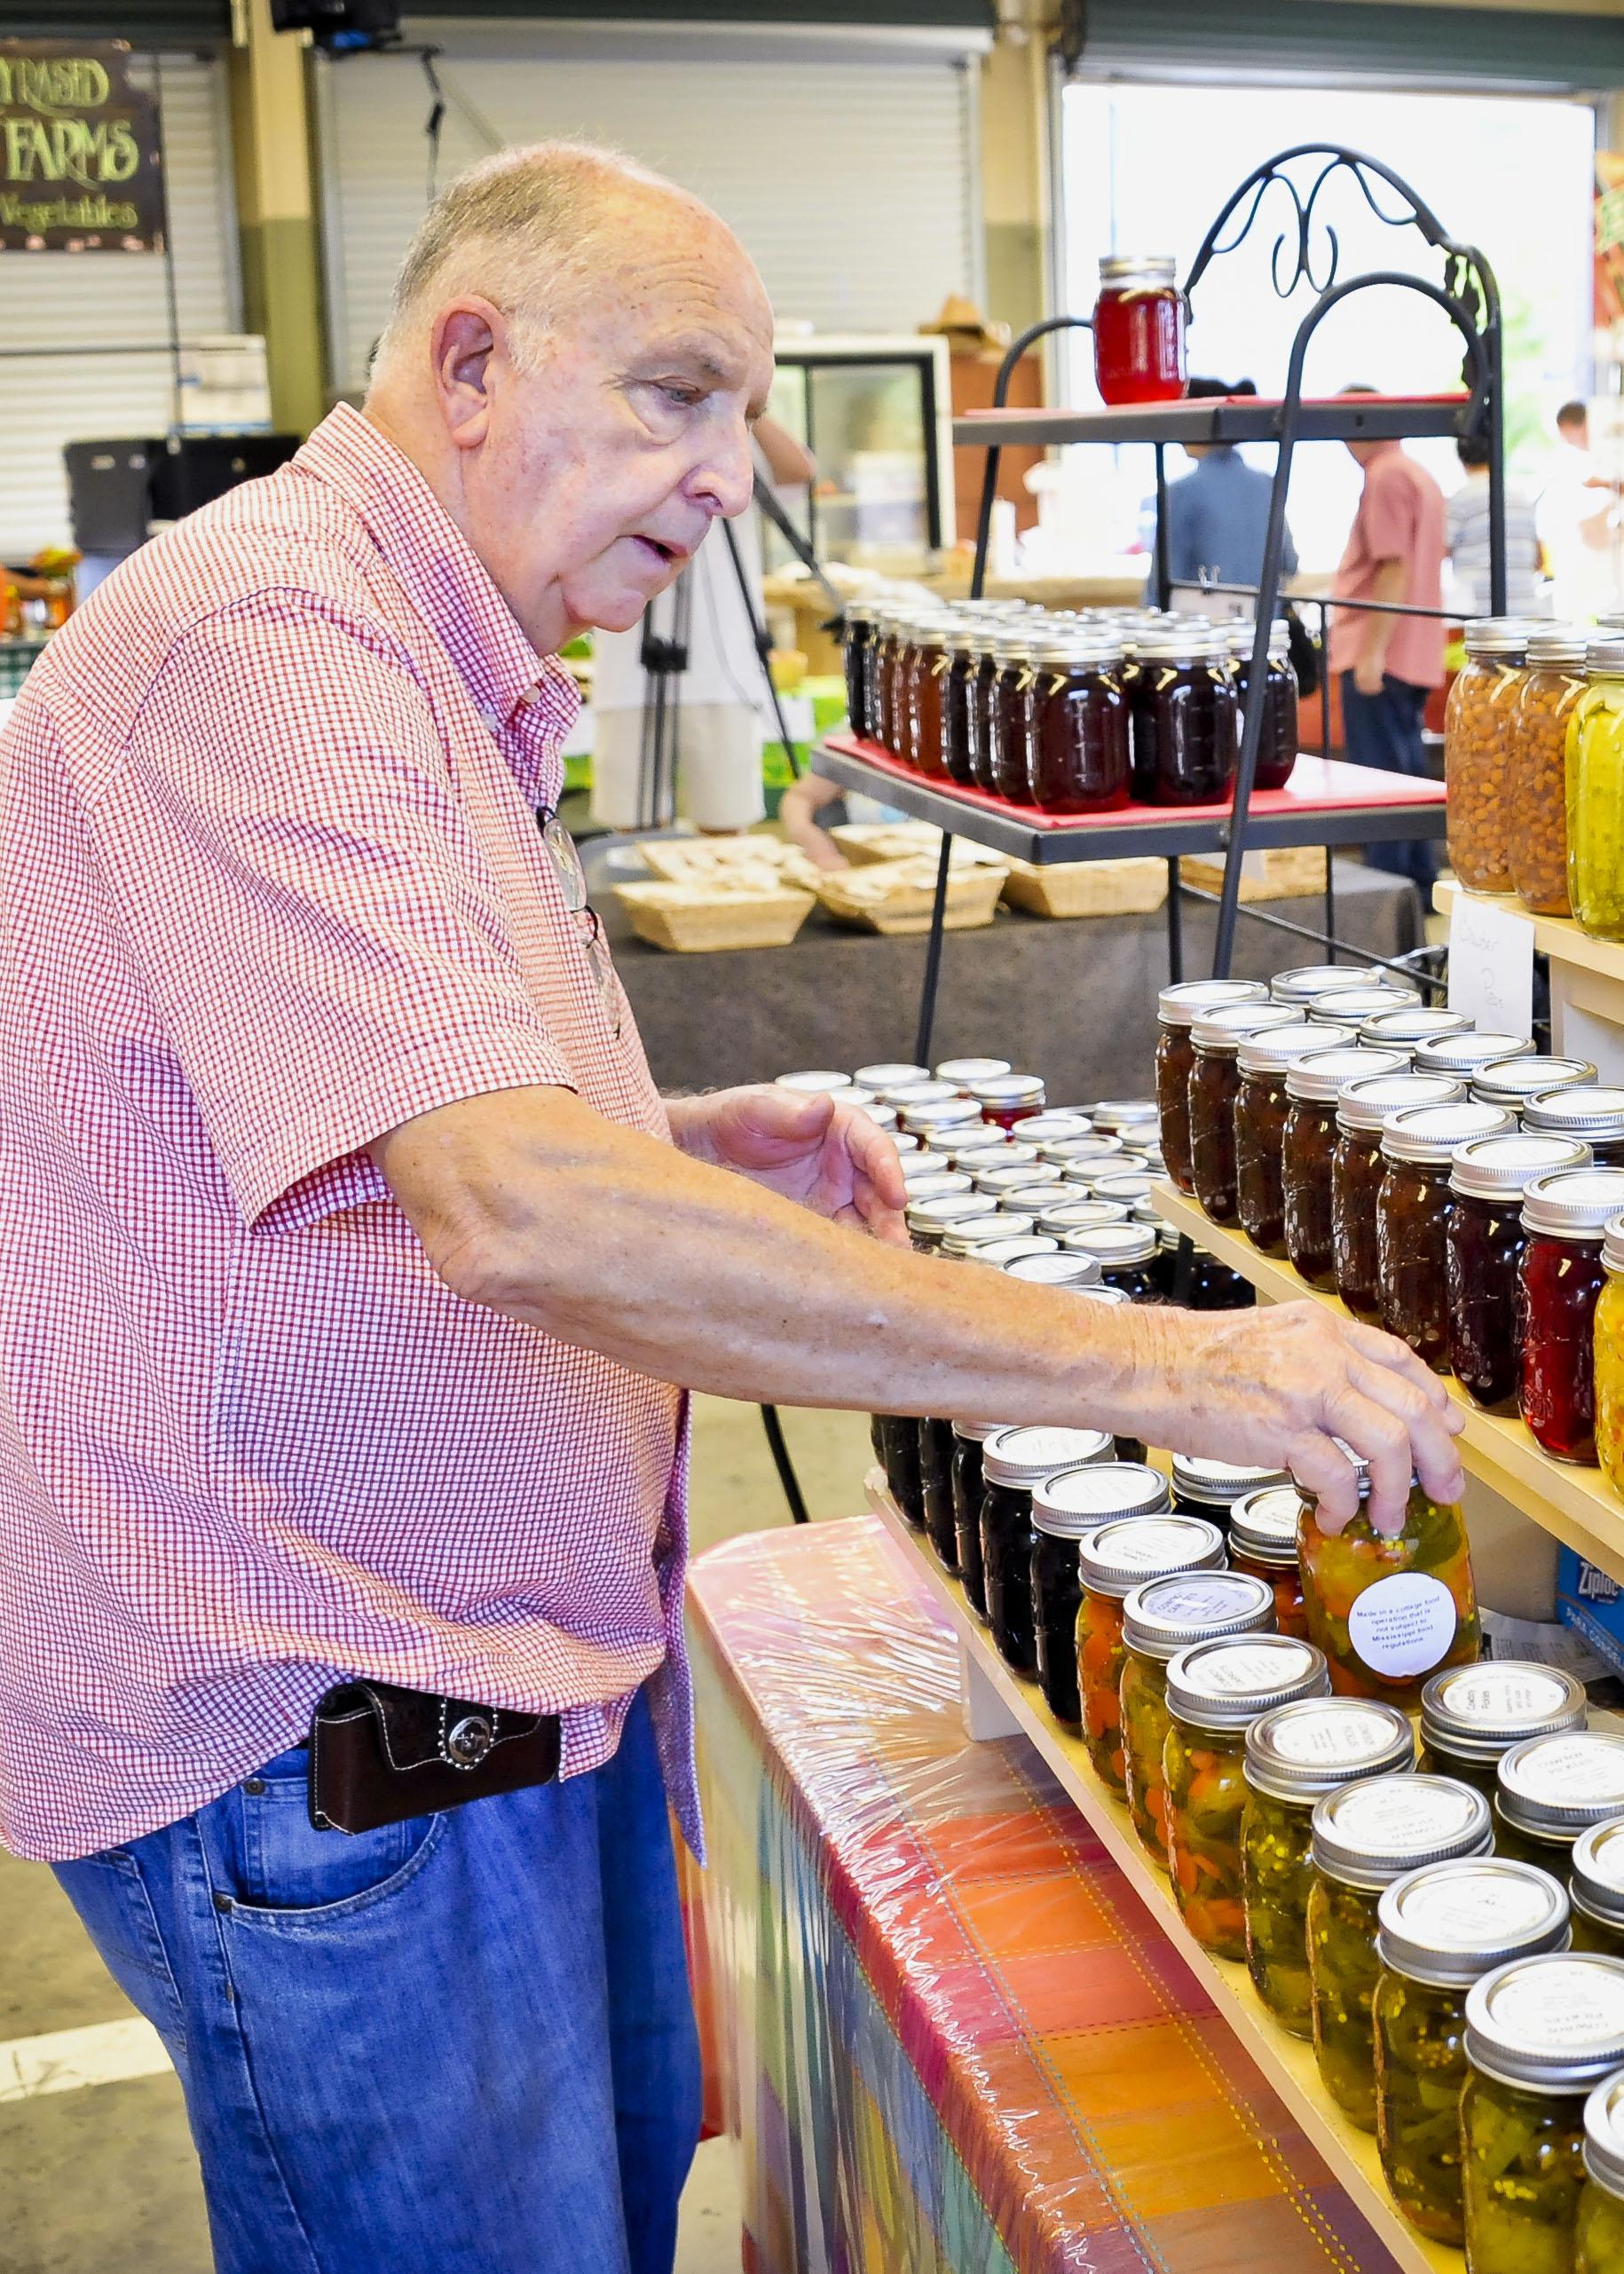 Claude Jones of Brandon sells canned and baked goods at the Mississippi Farmers Market in Jackson made in his home-based business, Old Fashioned Taste. (Photo by MSU Ag Communications/Scott Corey)